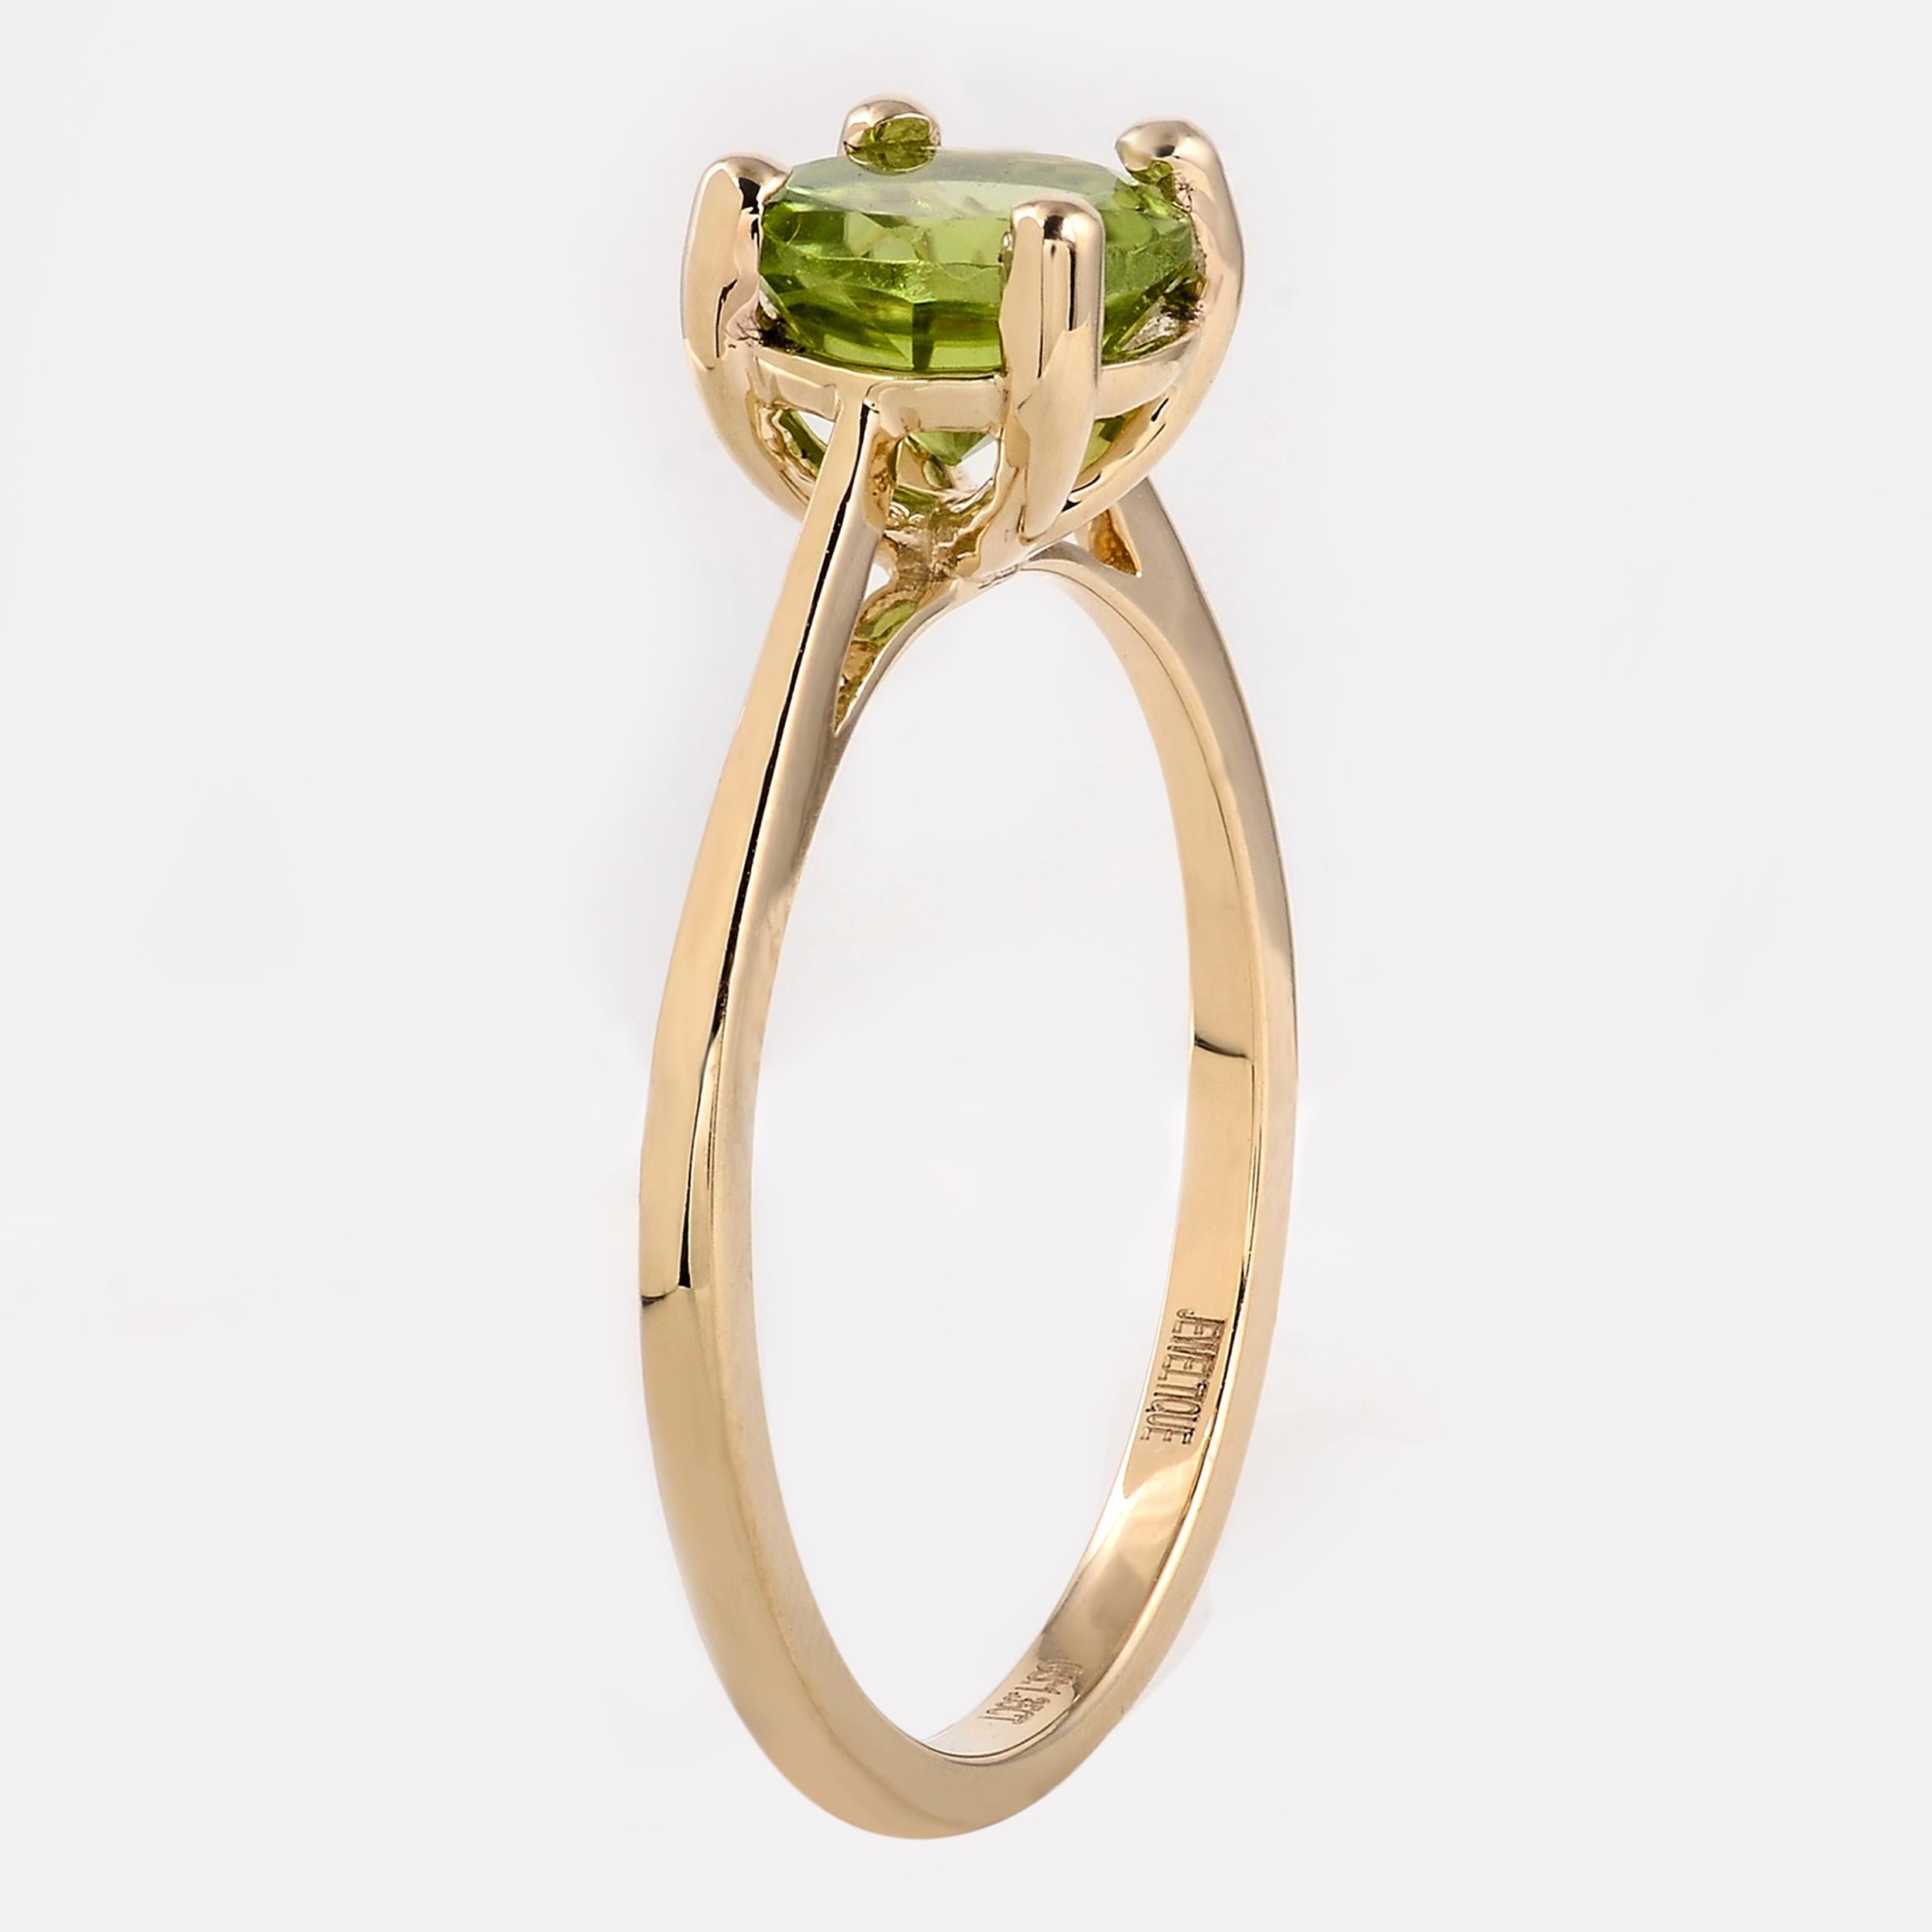 Chic 14K 1.09ct Peridot Solitaire Cocktail Ring, Size 7 - Statement Jewelry For Sale 2